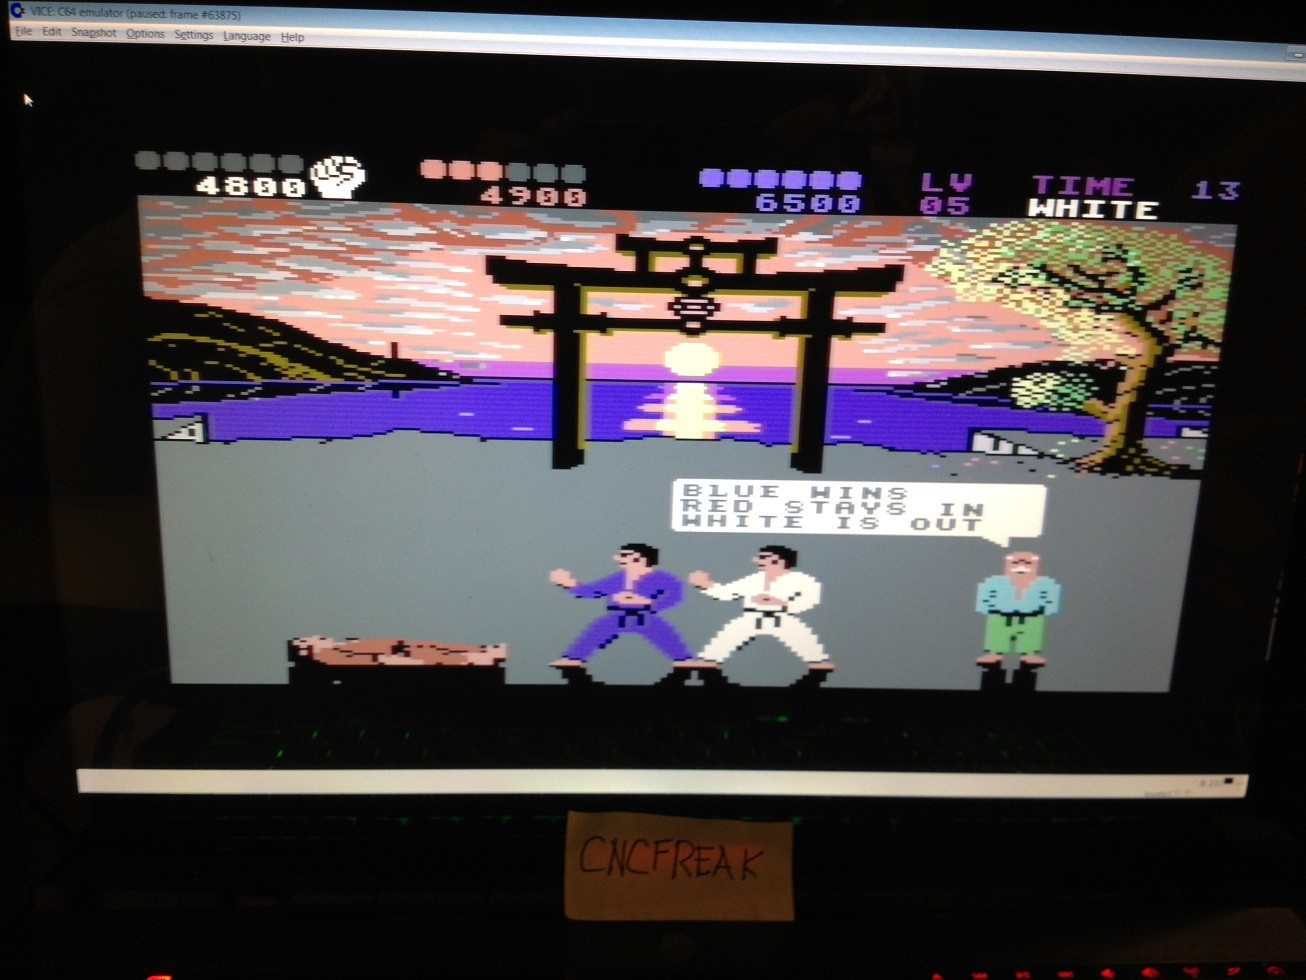 cncfreak: IK+ (Commodore 64 Emulated) 4,800 points on 2013-10-13 21:06:54